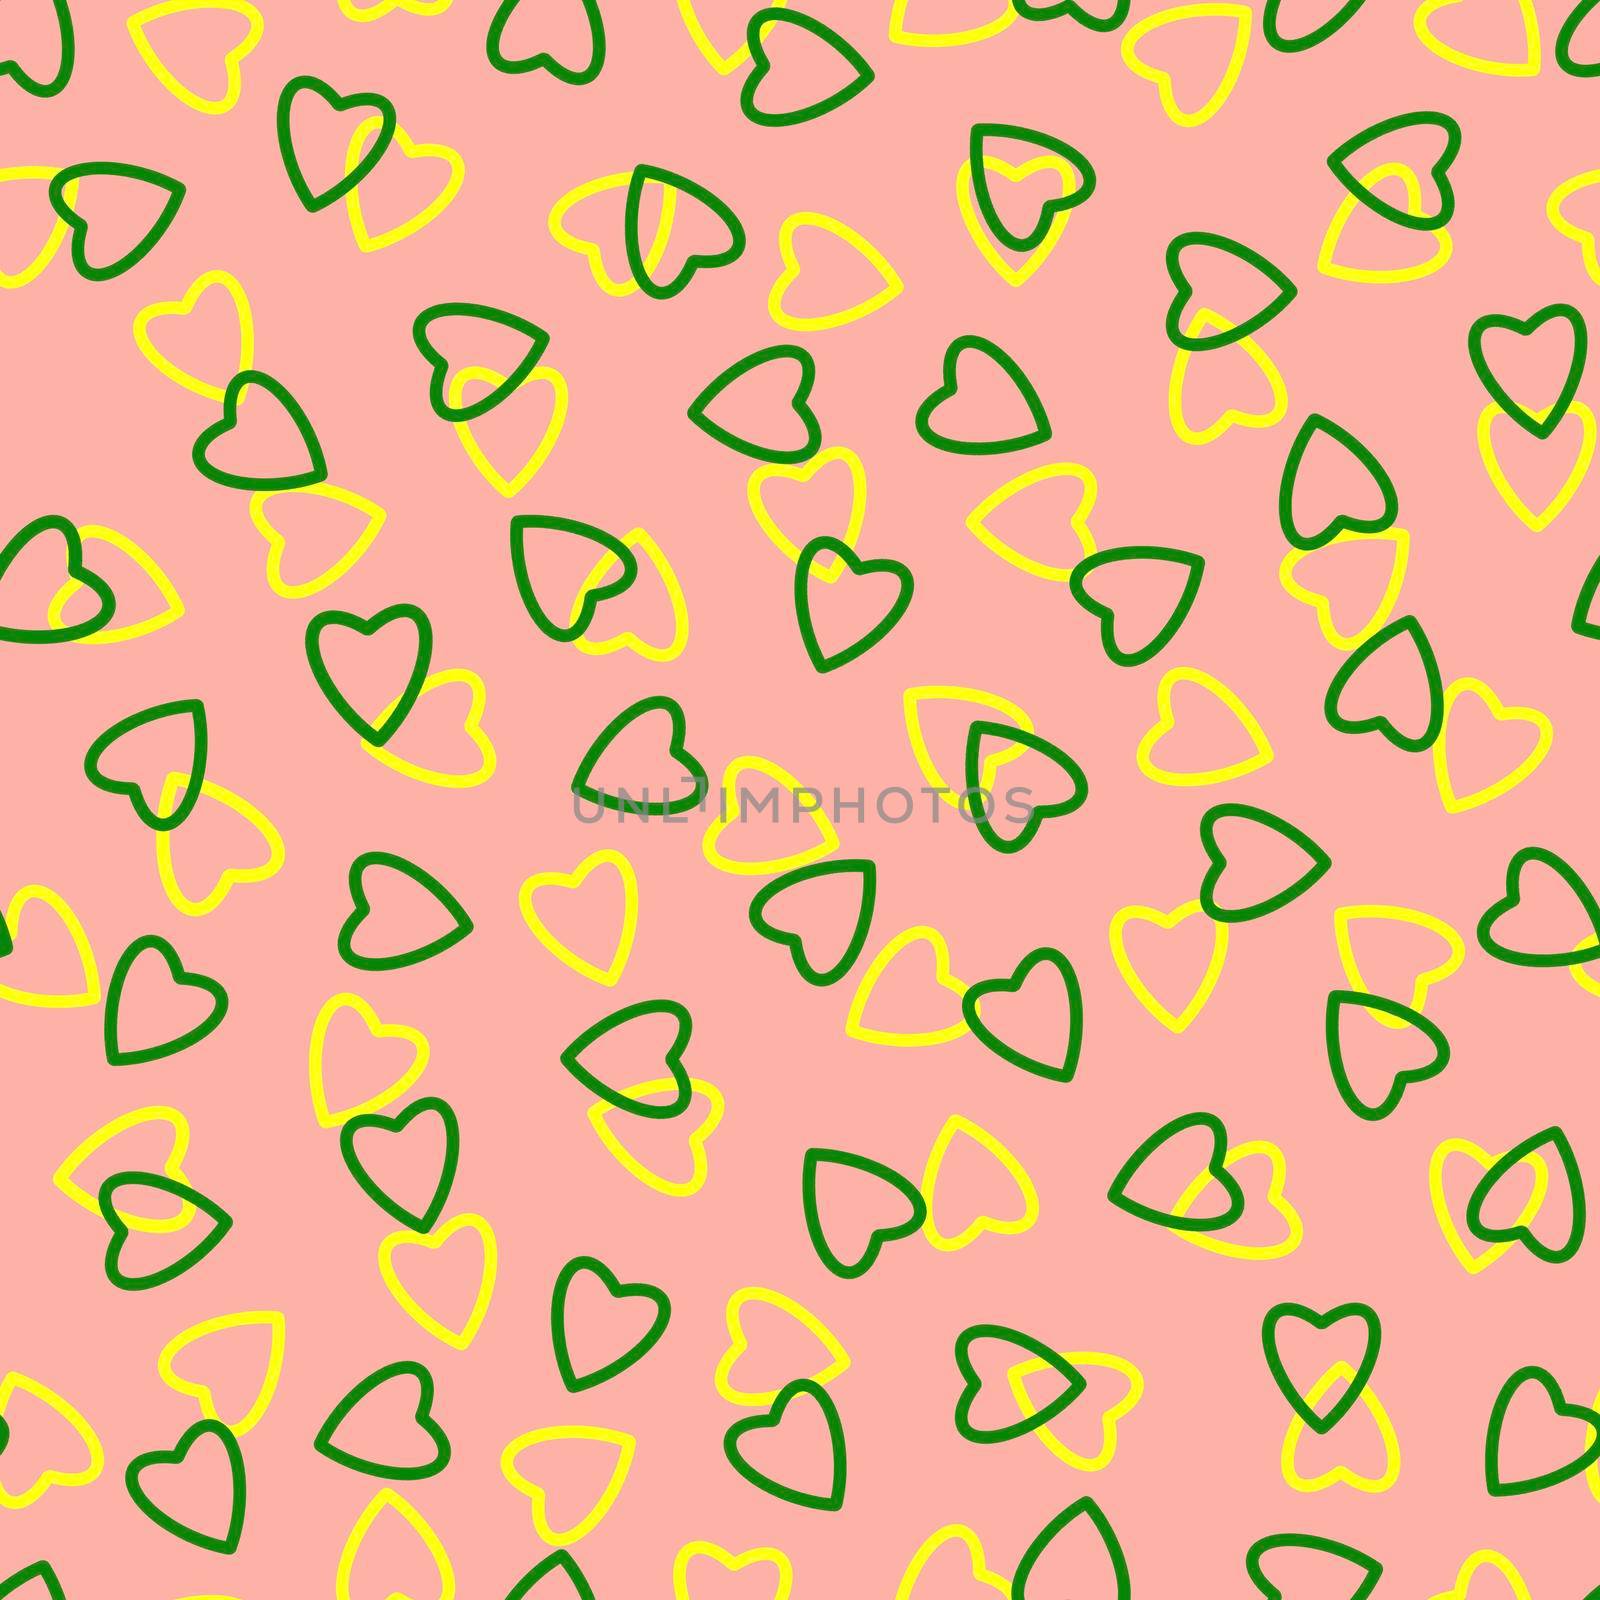 Simple hearts seamless pattern,endless chaotic texture made tiny heart silhouettes.Valentines,mothers day background.Great for Easter,wedding,scrapbook,gift wrapping paper,textiles.Green,yellow,peach by Angelsmoon